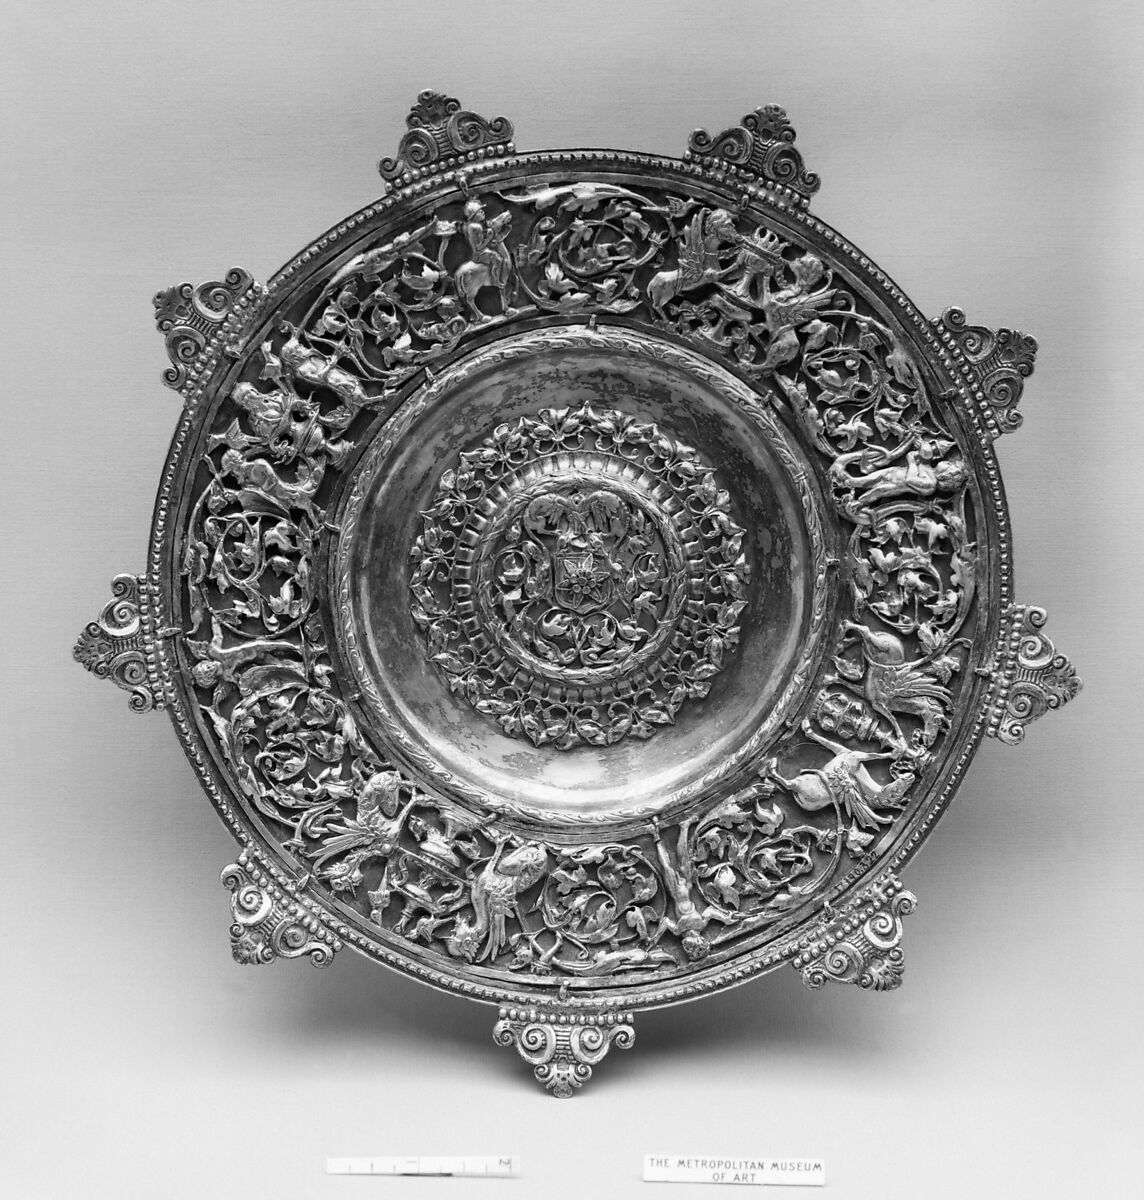 Plateau, Silver, partly gilt, possibly Portuguese 